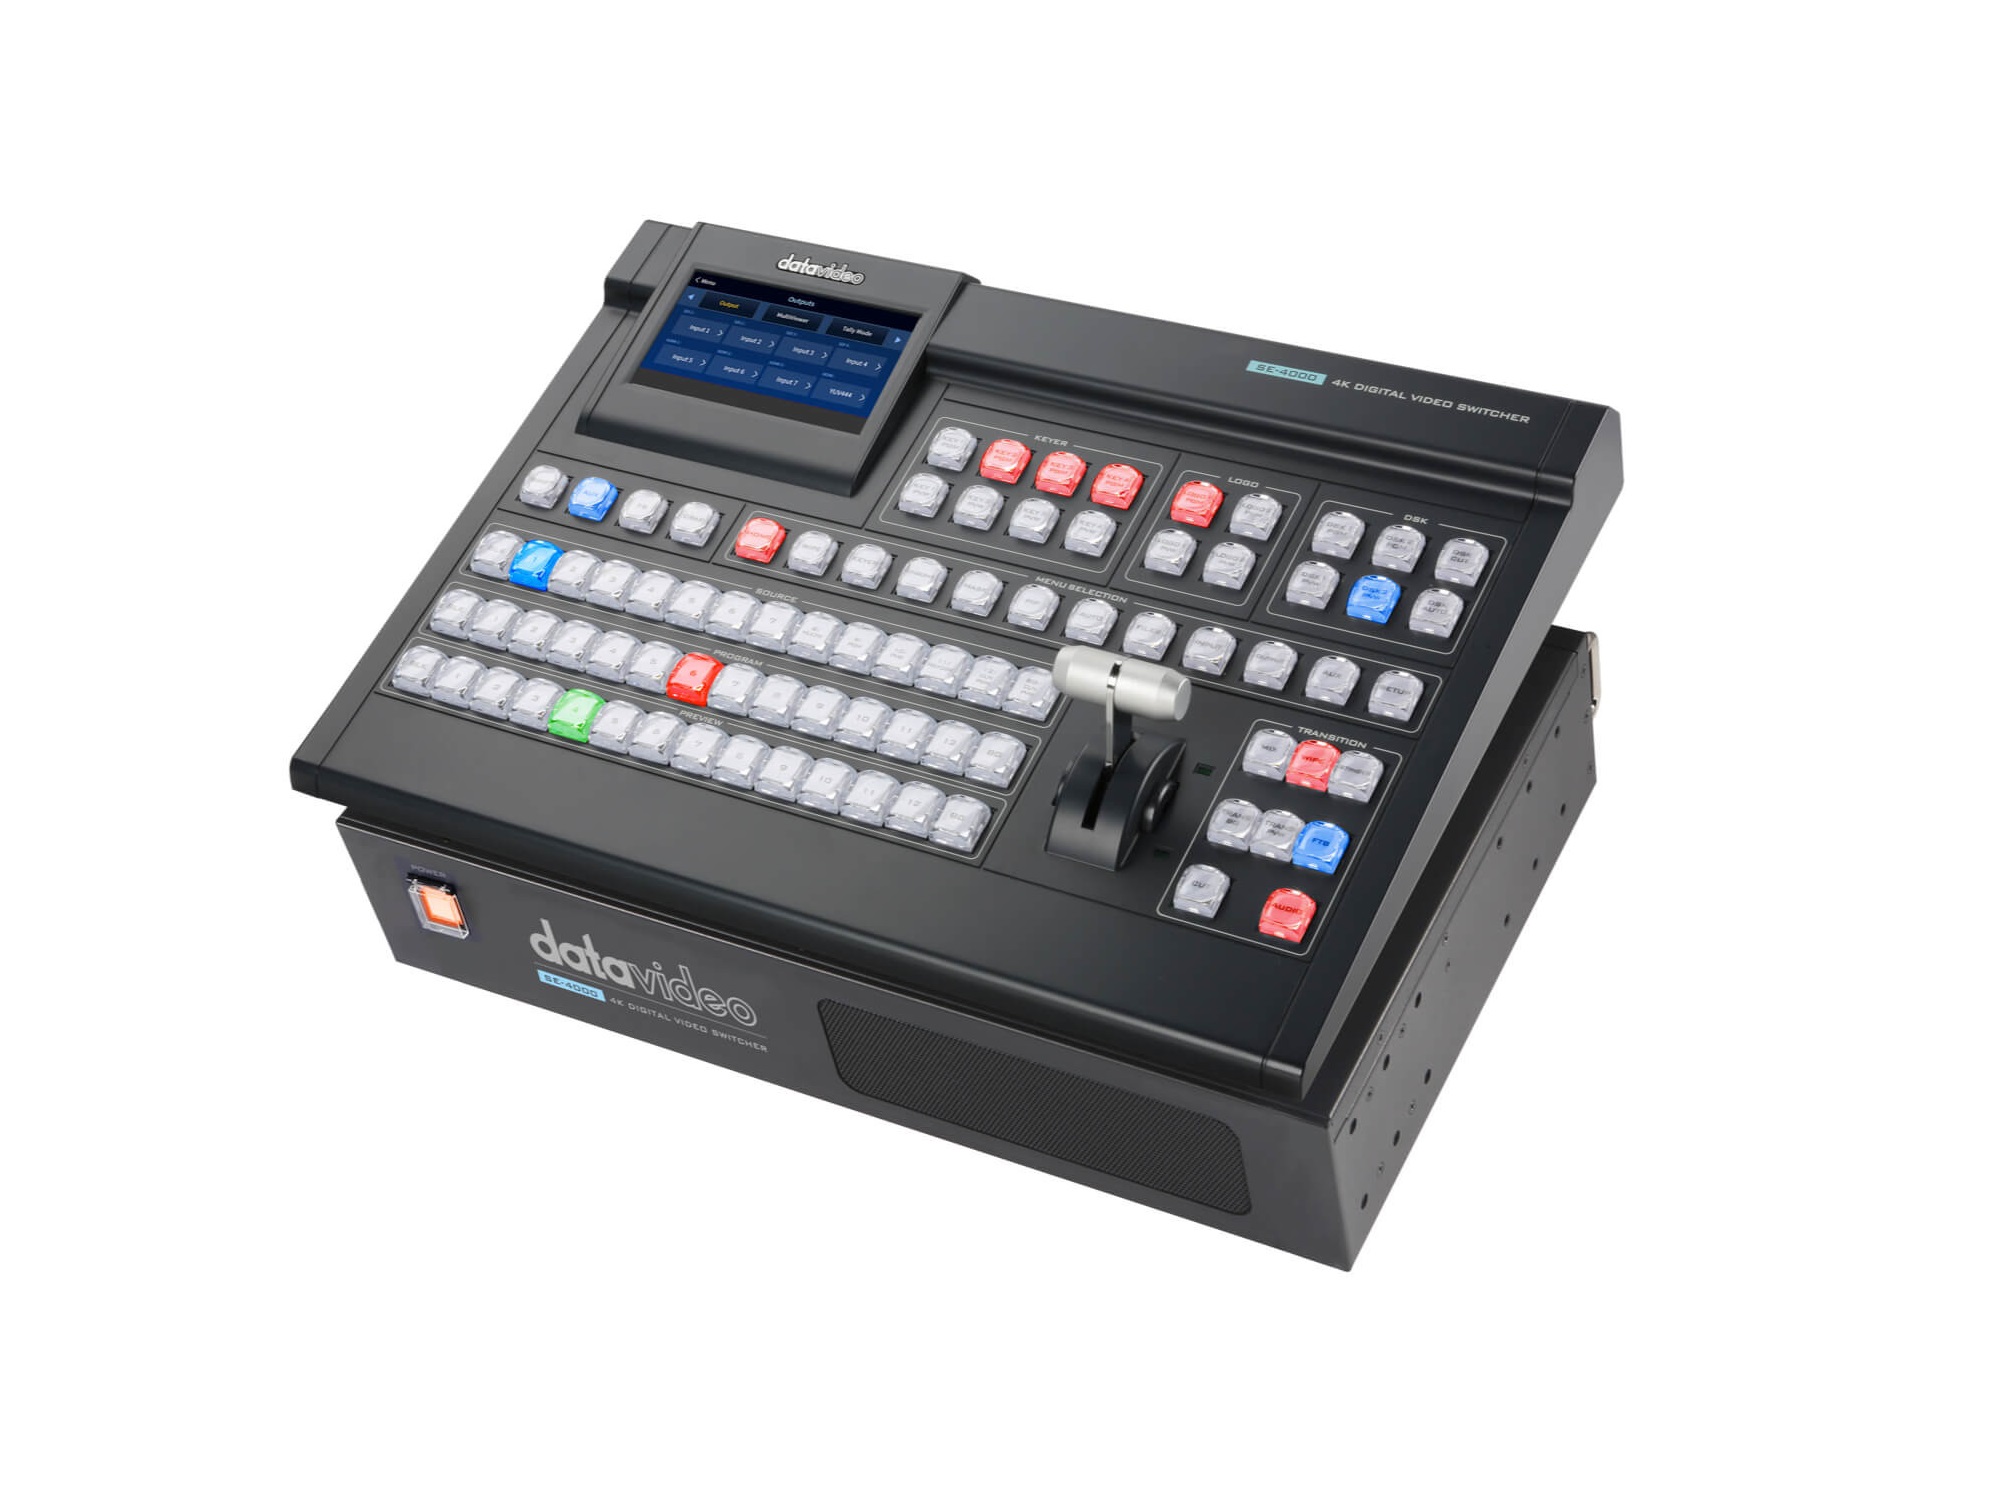 SE-4000 12 input 4K Video Switcher with 8 HD-SDI and 4 HDMI inputs by Datavideo